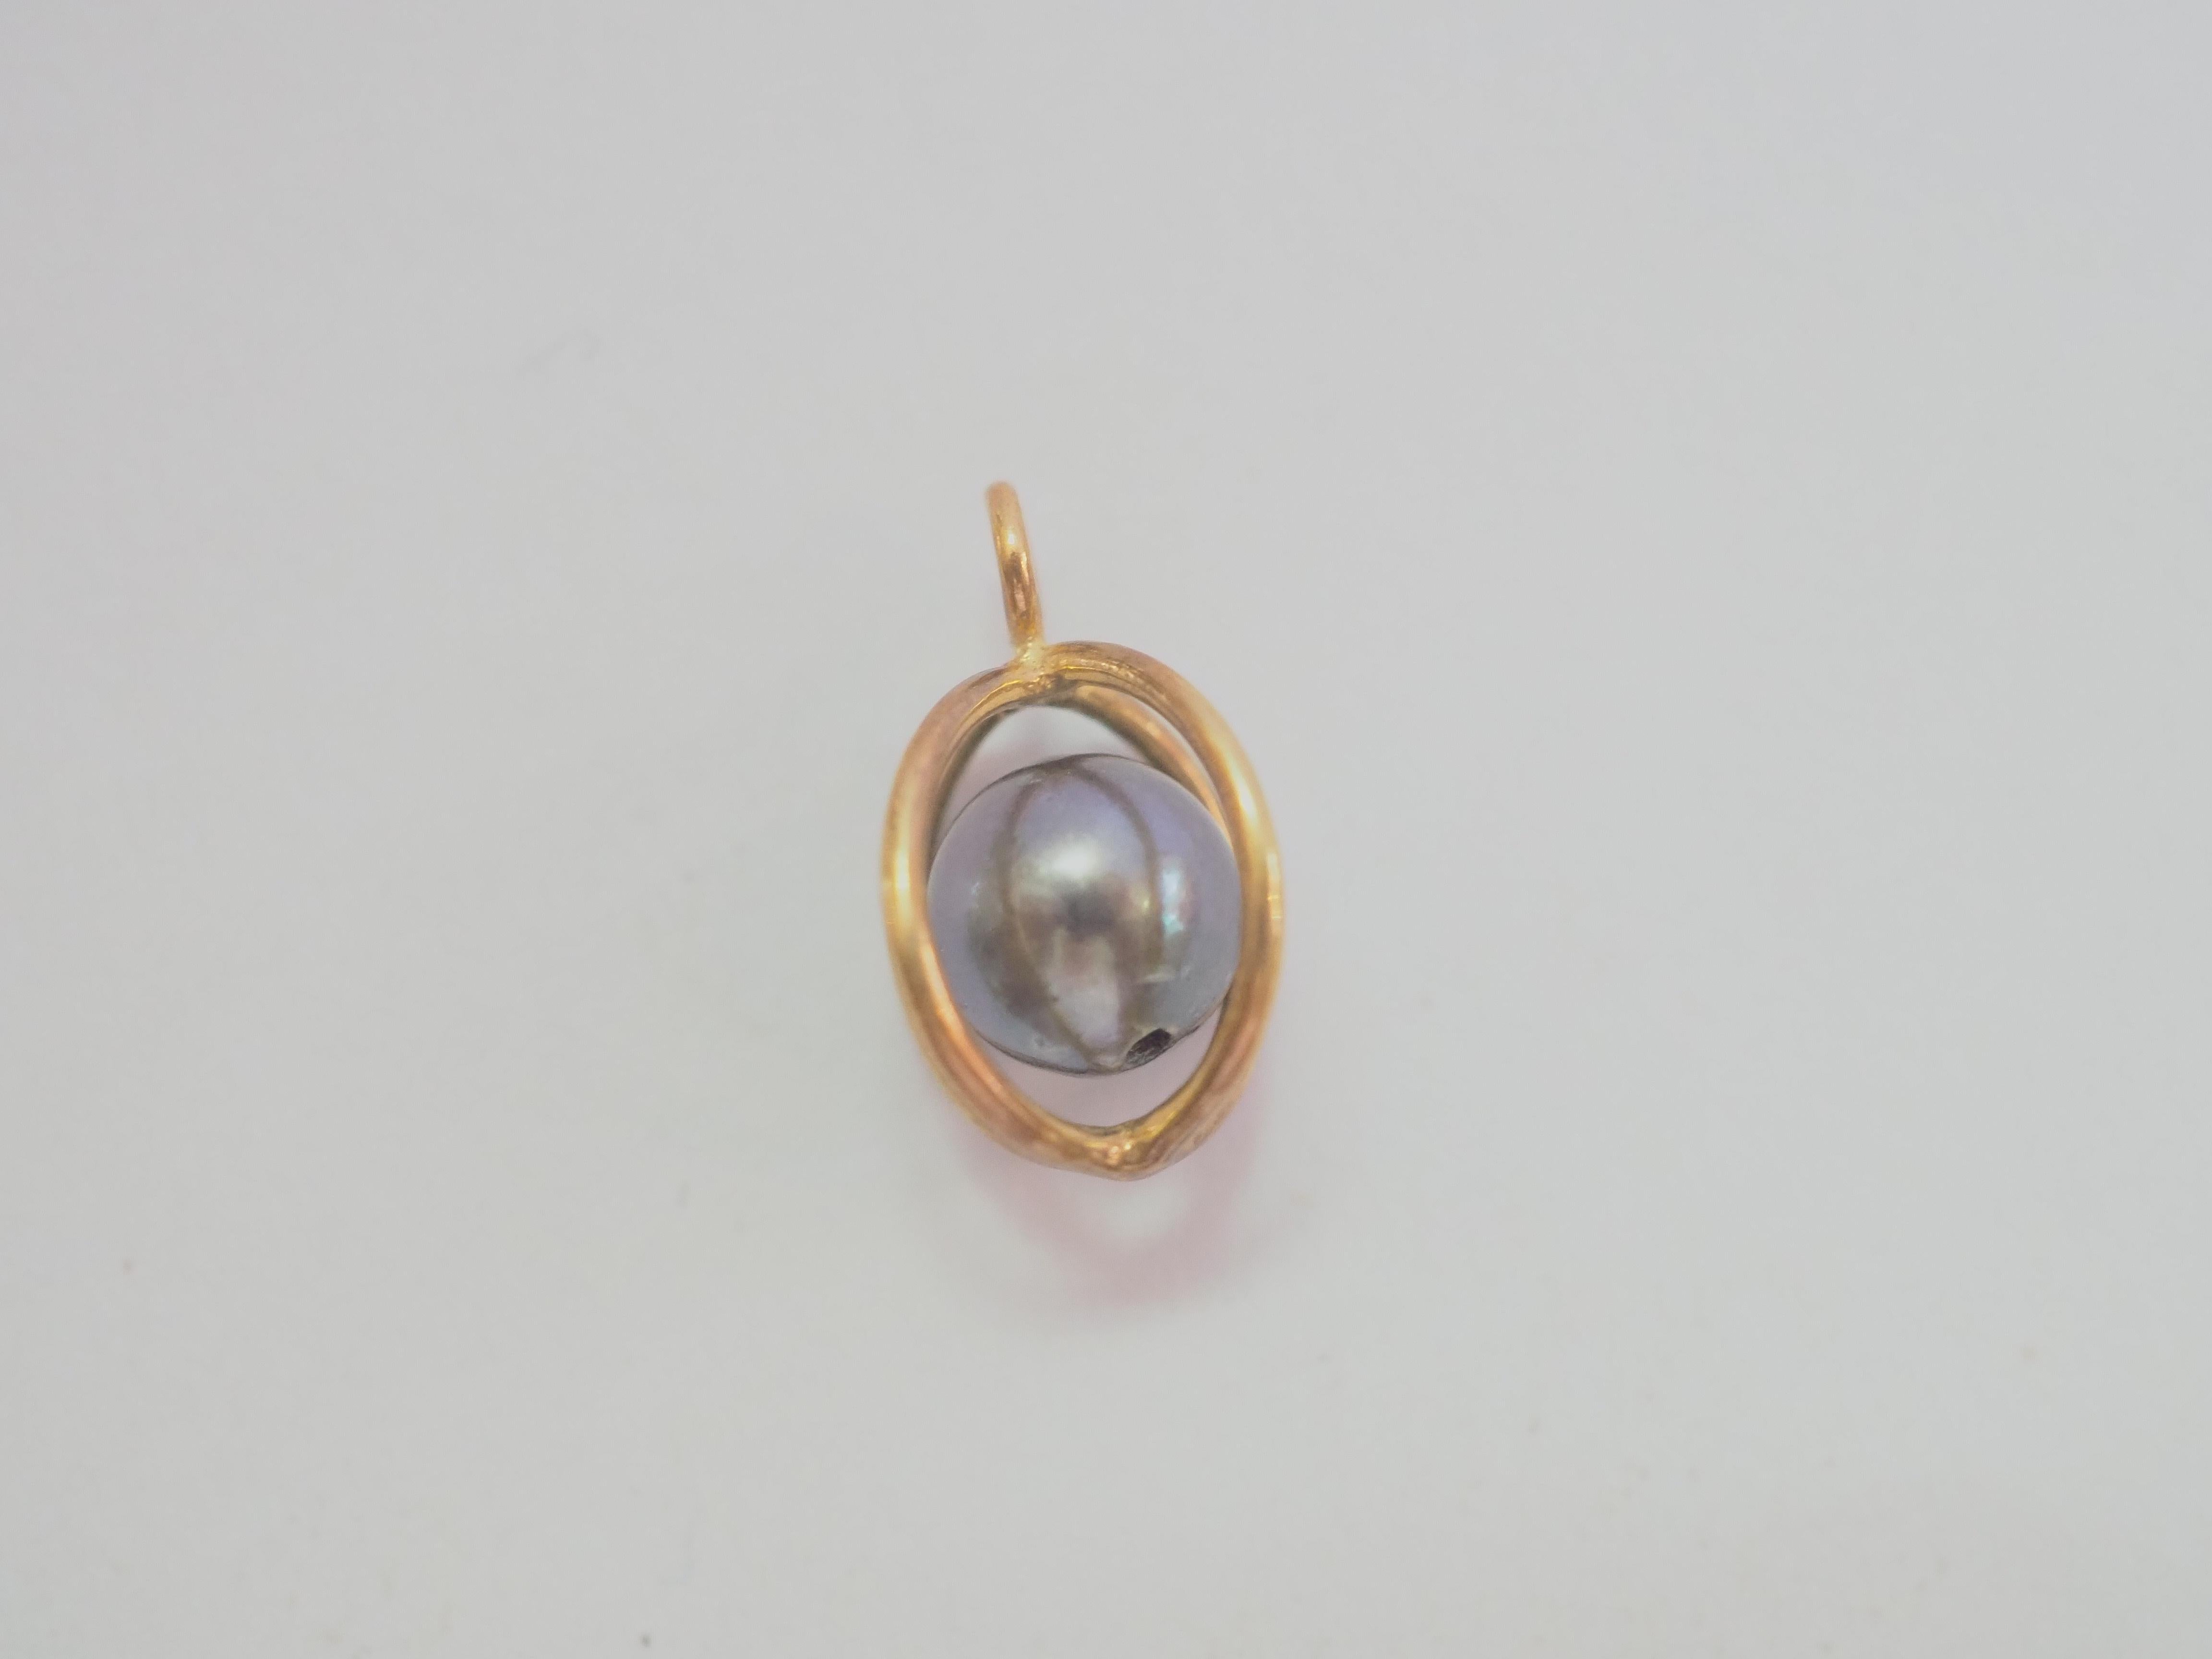 A beautiful and dainty pendant enhancer. This dainty piece is crafted using 14K solid yellow gold. The piece is adorned with a gorgeous black pearl set/caged inside the gold mounting moving freely inside the cage. This piece can be a wonderful and